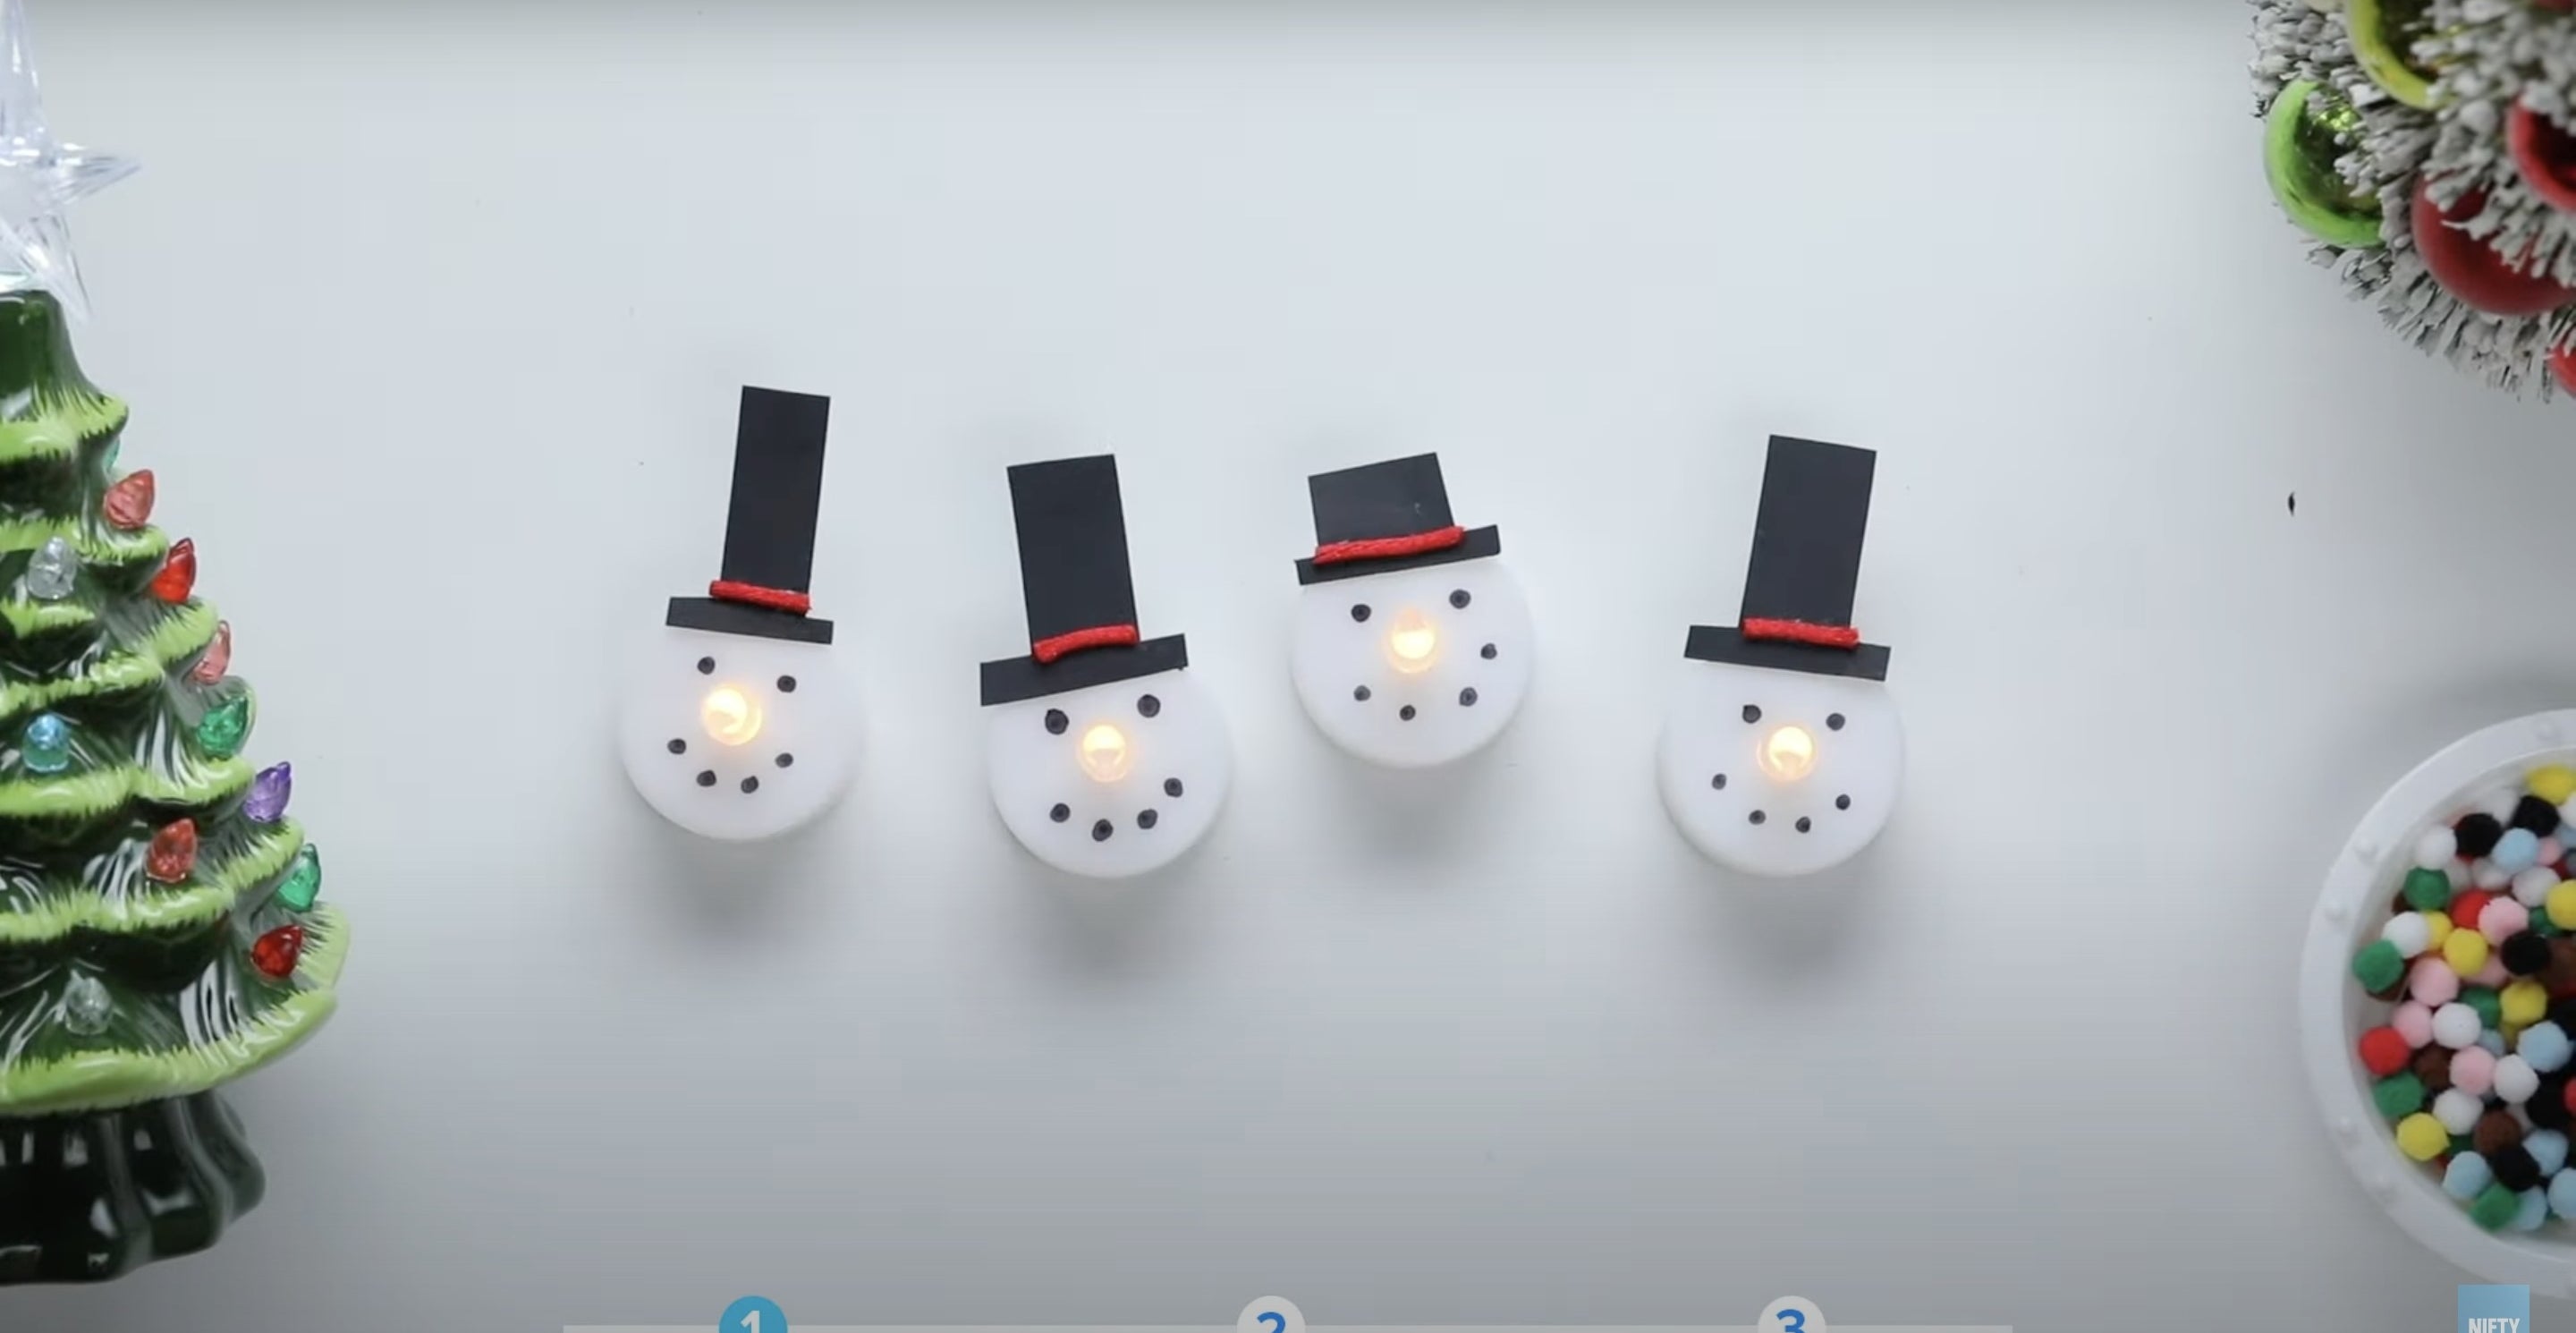 Snowman face figures with hats